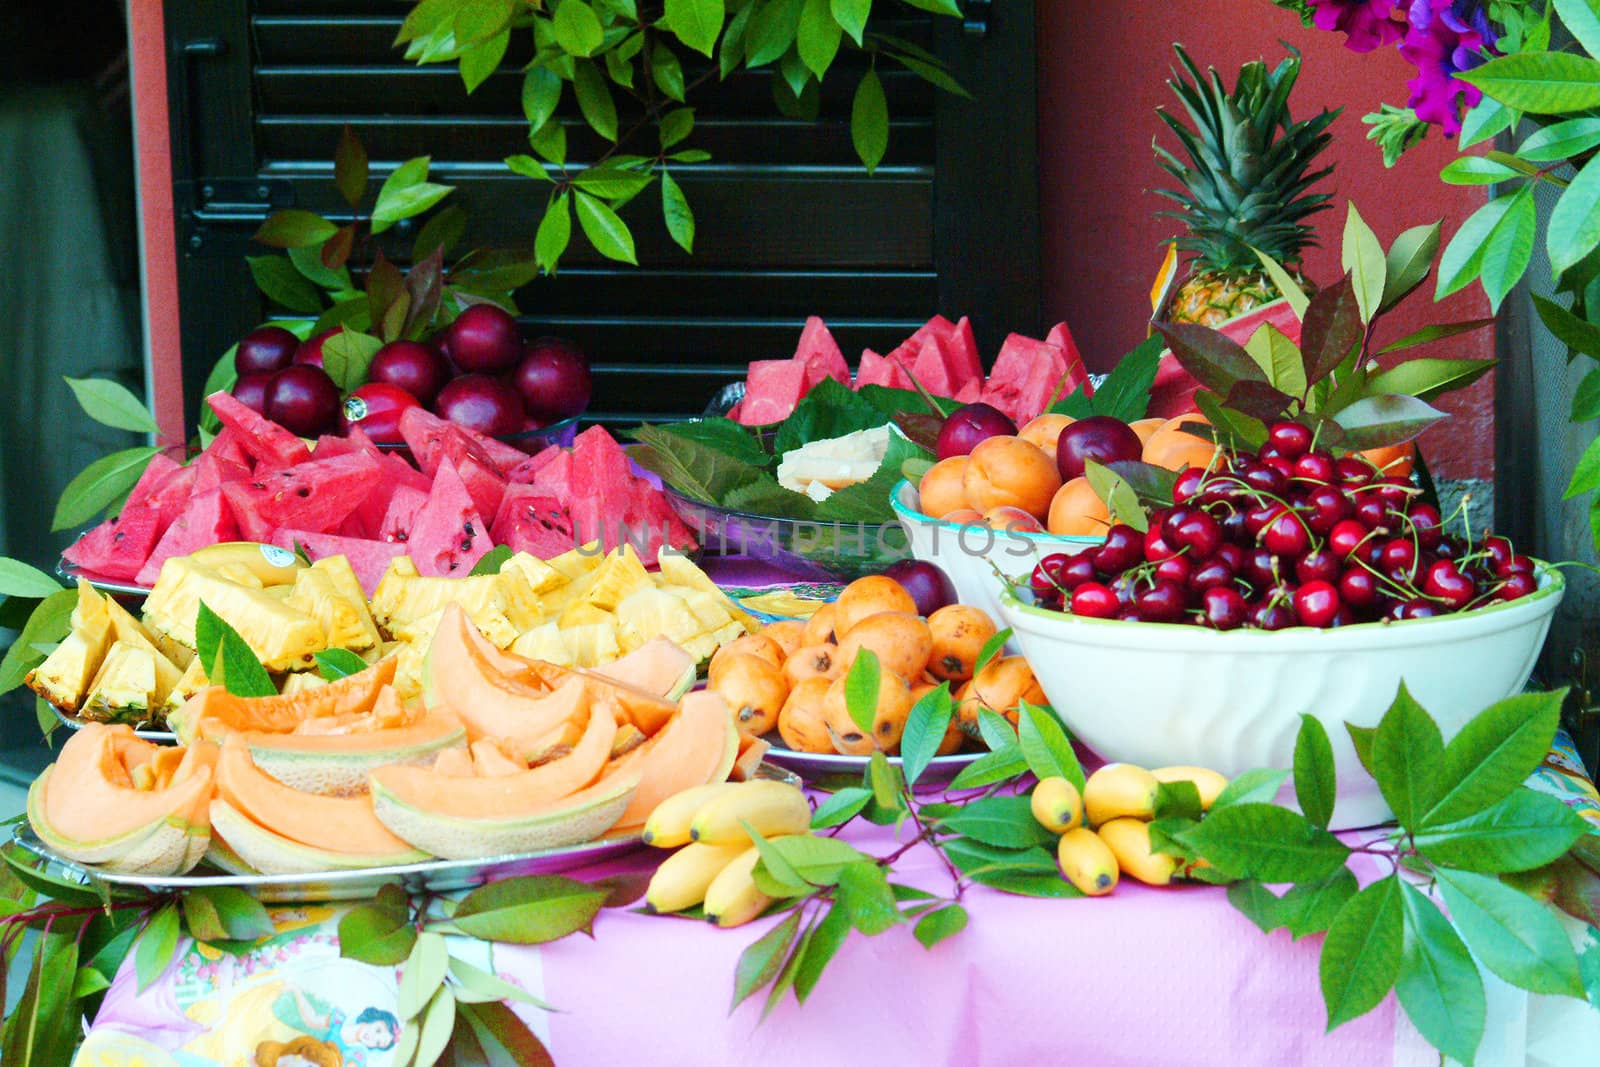 A great table full of fresh fruit